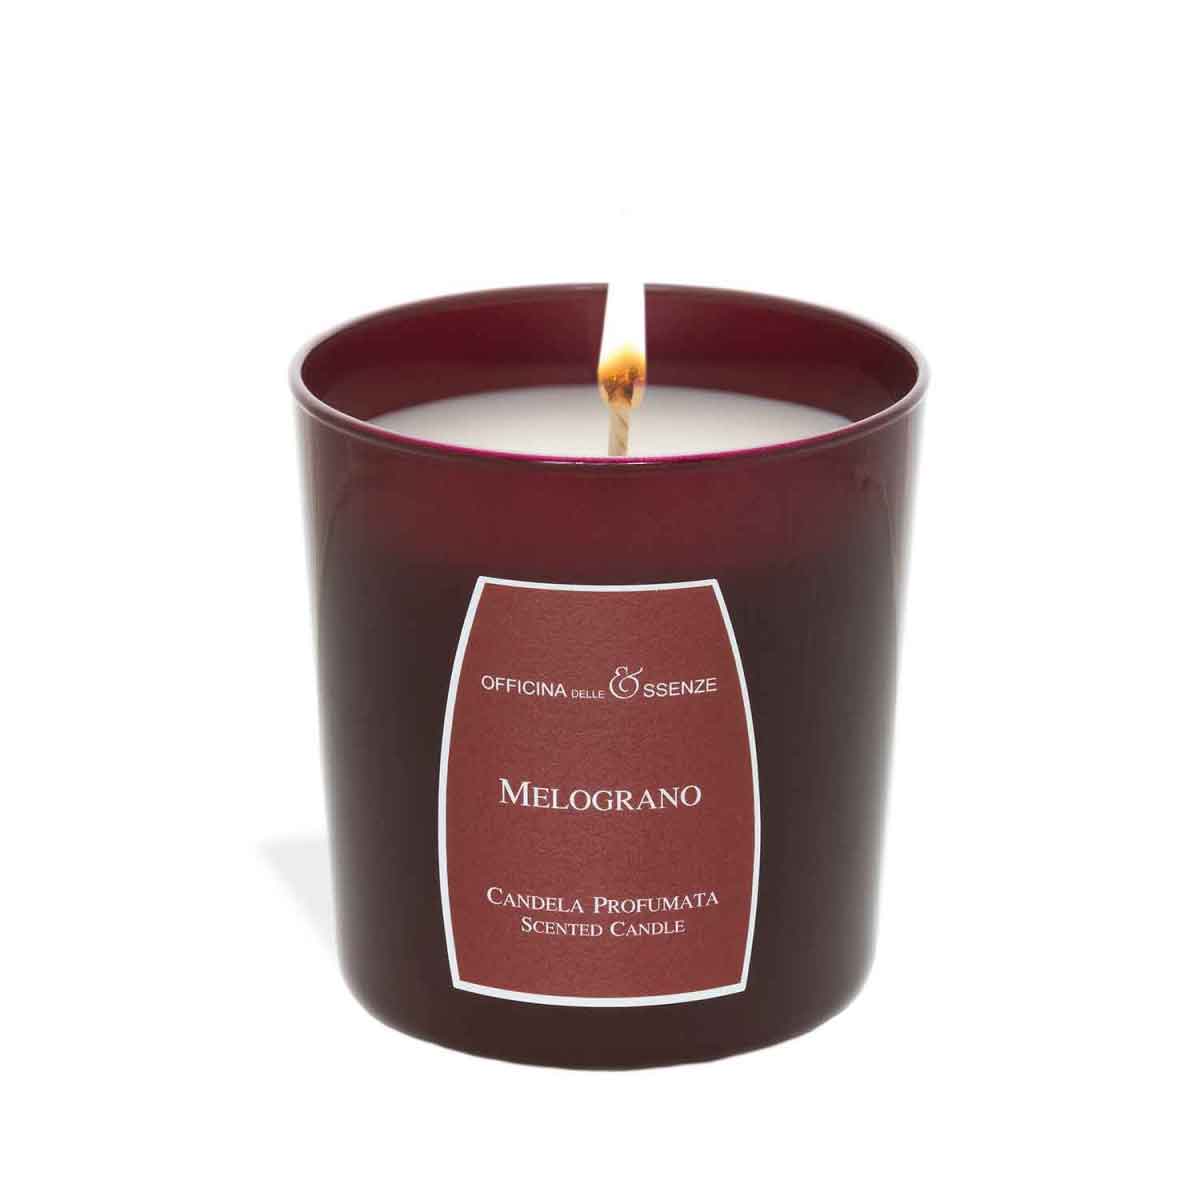 Pomegranate scented candle